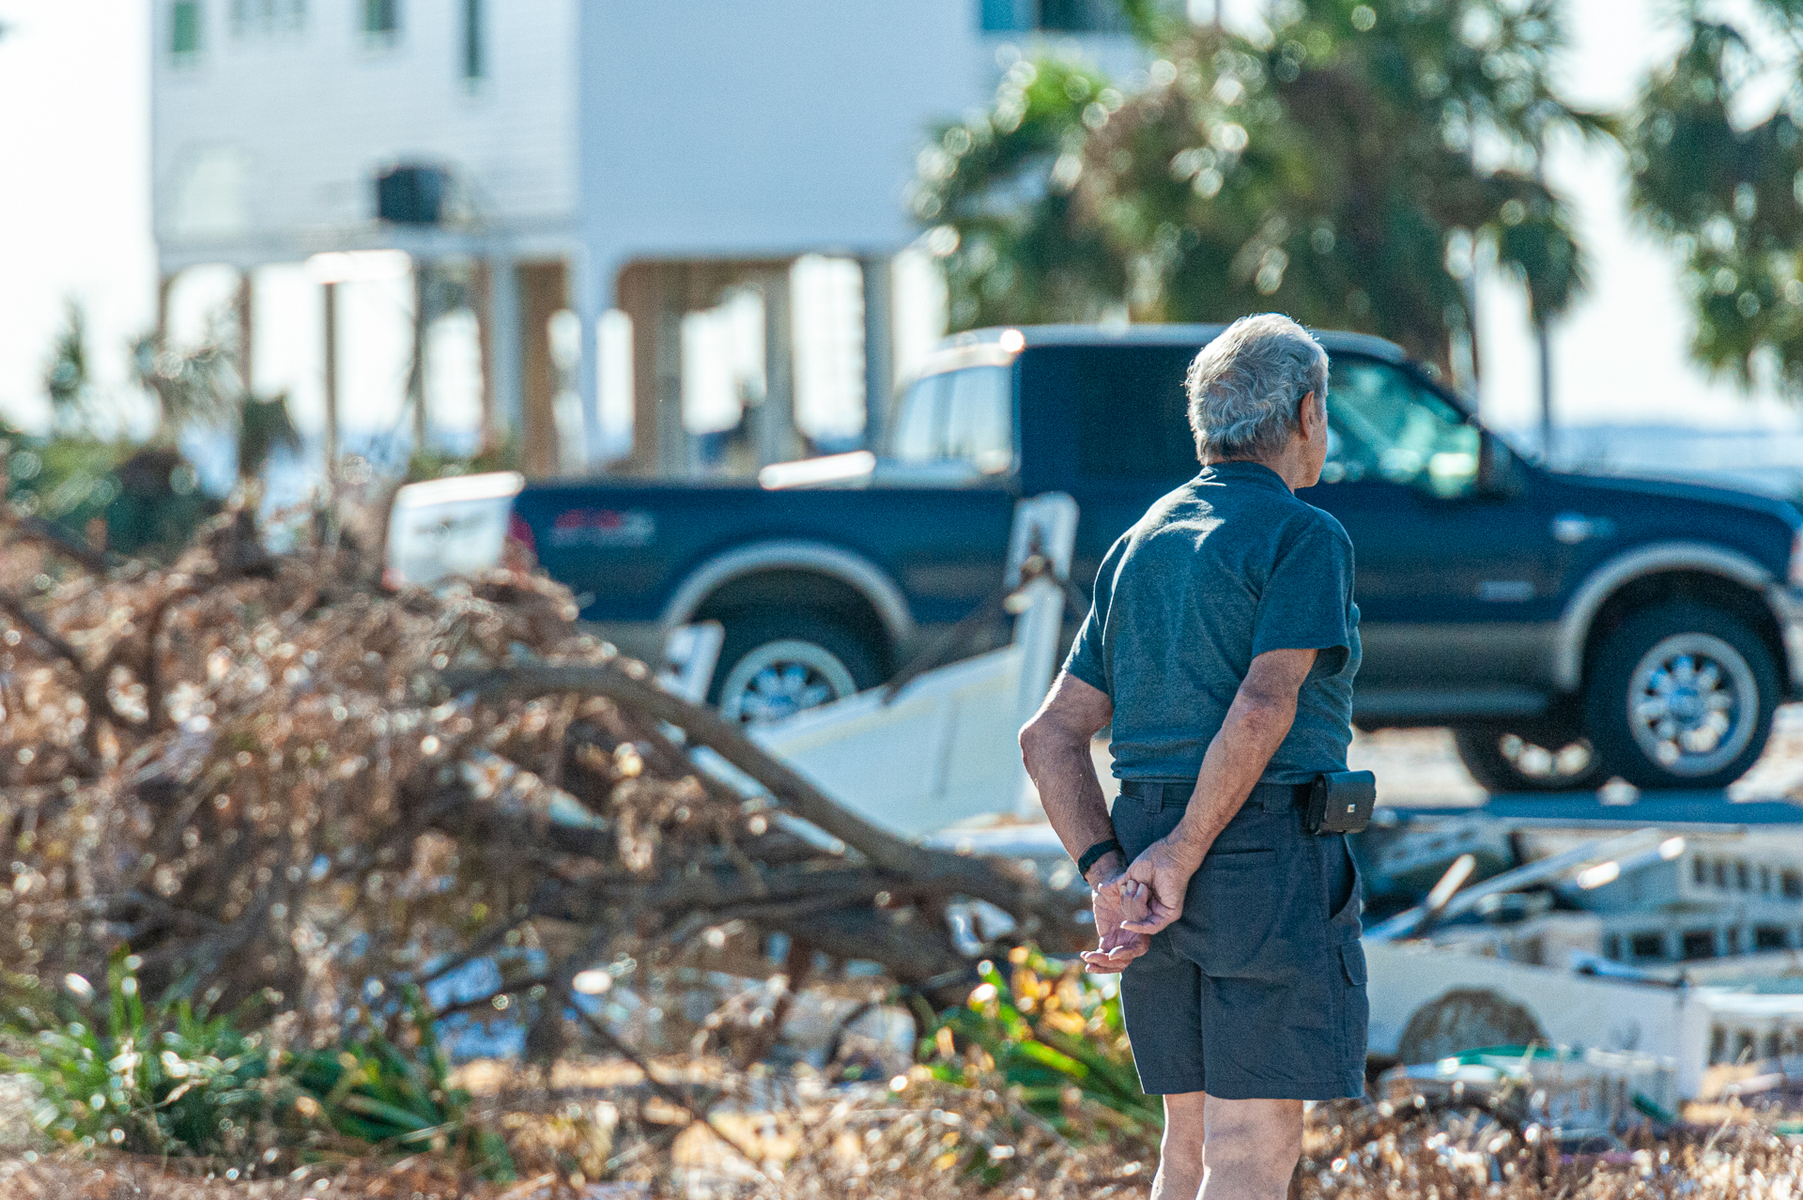 October 18, 2018 - Mexico Beach, FL - George Mamary of Atlanta, GA survey's what is left of his vacation home in Mexico Beach, Florida after Hurricane Michael as passed through the area on October 10, 2018. Florida.  The hurricane hit the Florida Panhandle as a category 5 storm causing massive damage and claimed the lives of more then a dozen people.